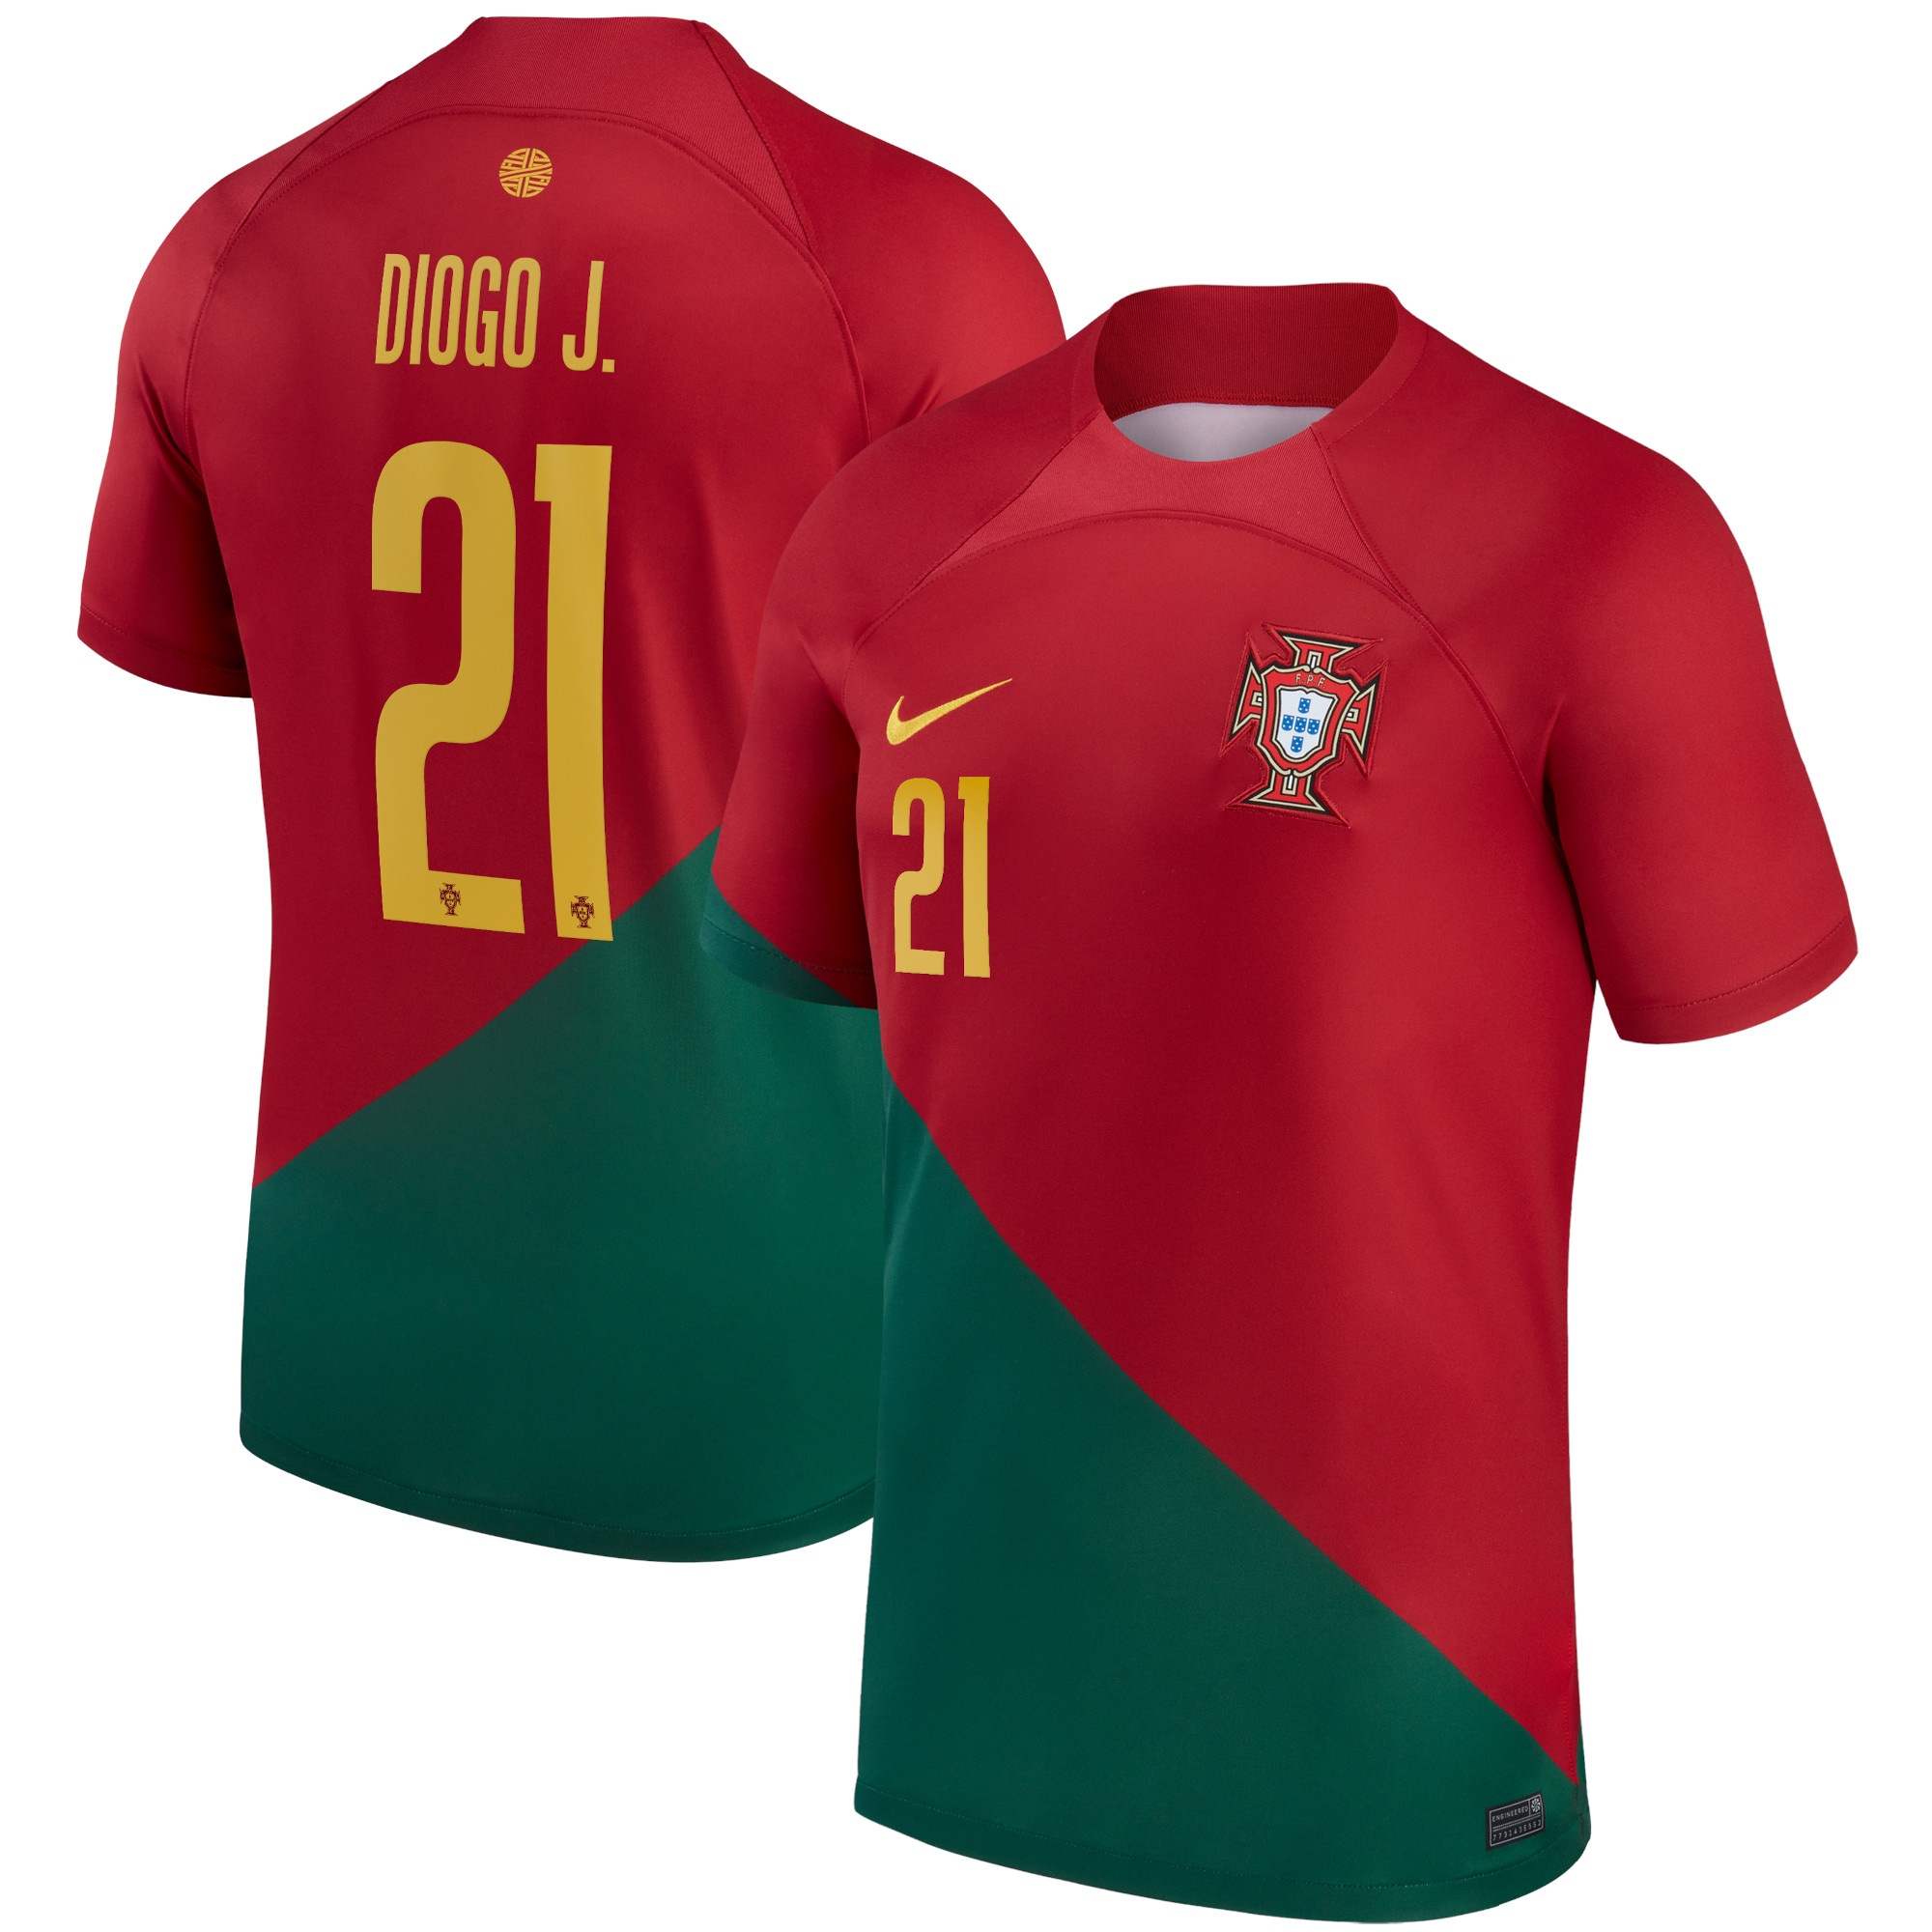 Men's Portugal National Team Jerseys Red Diogo Jota 2022/23 Home Breathe Stadium Printed Player Style